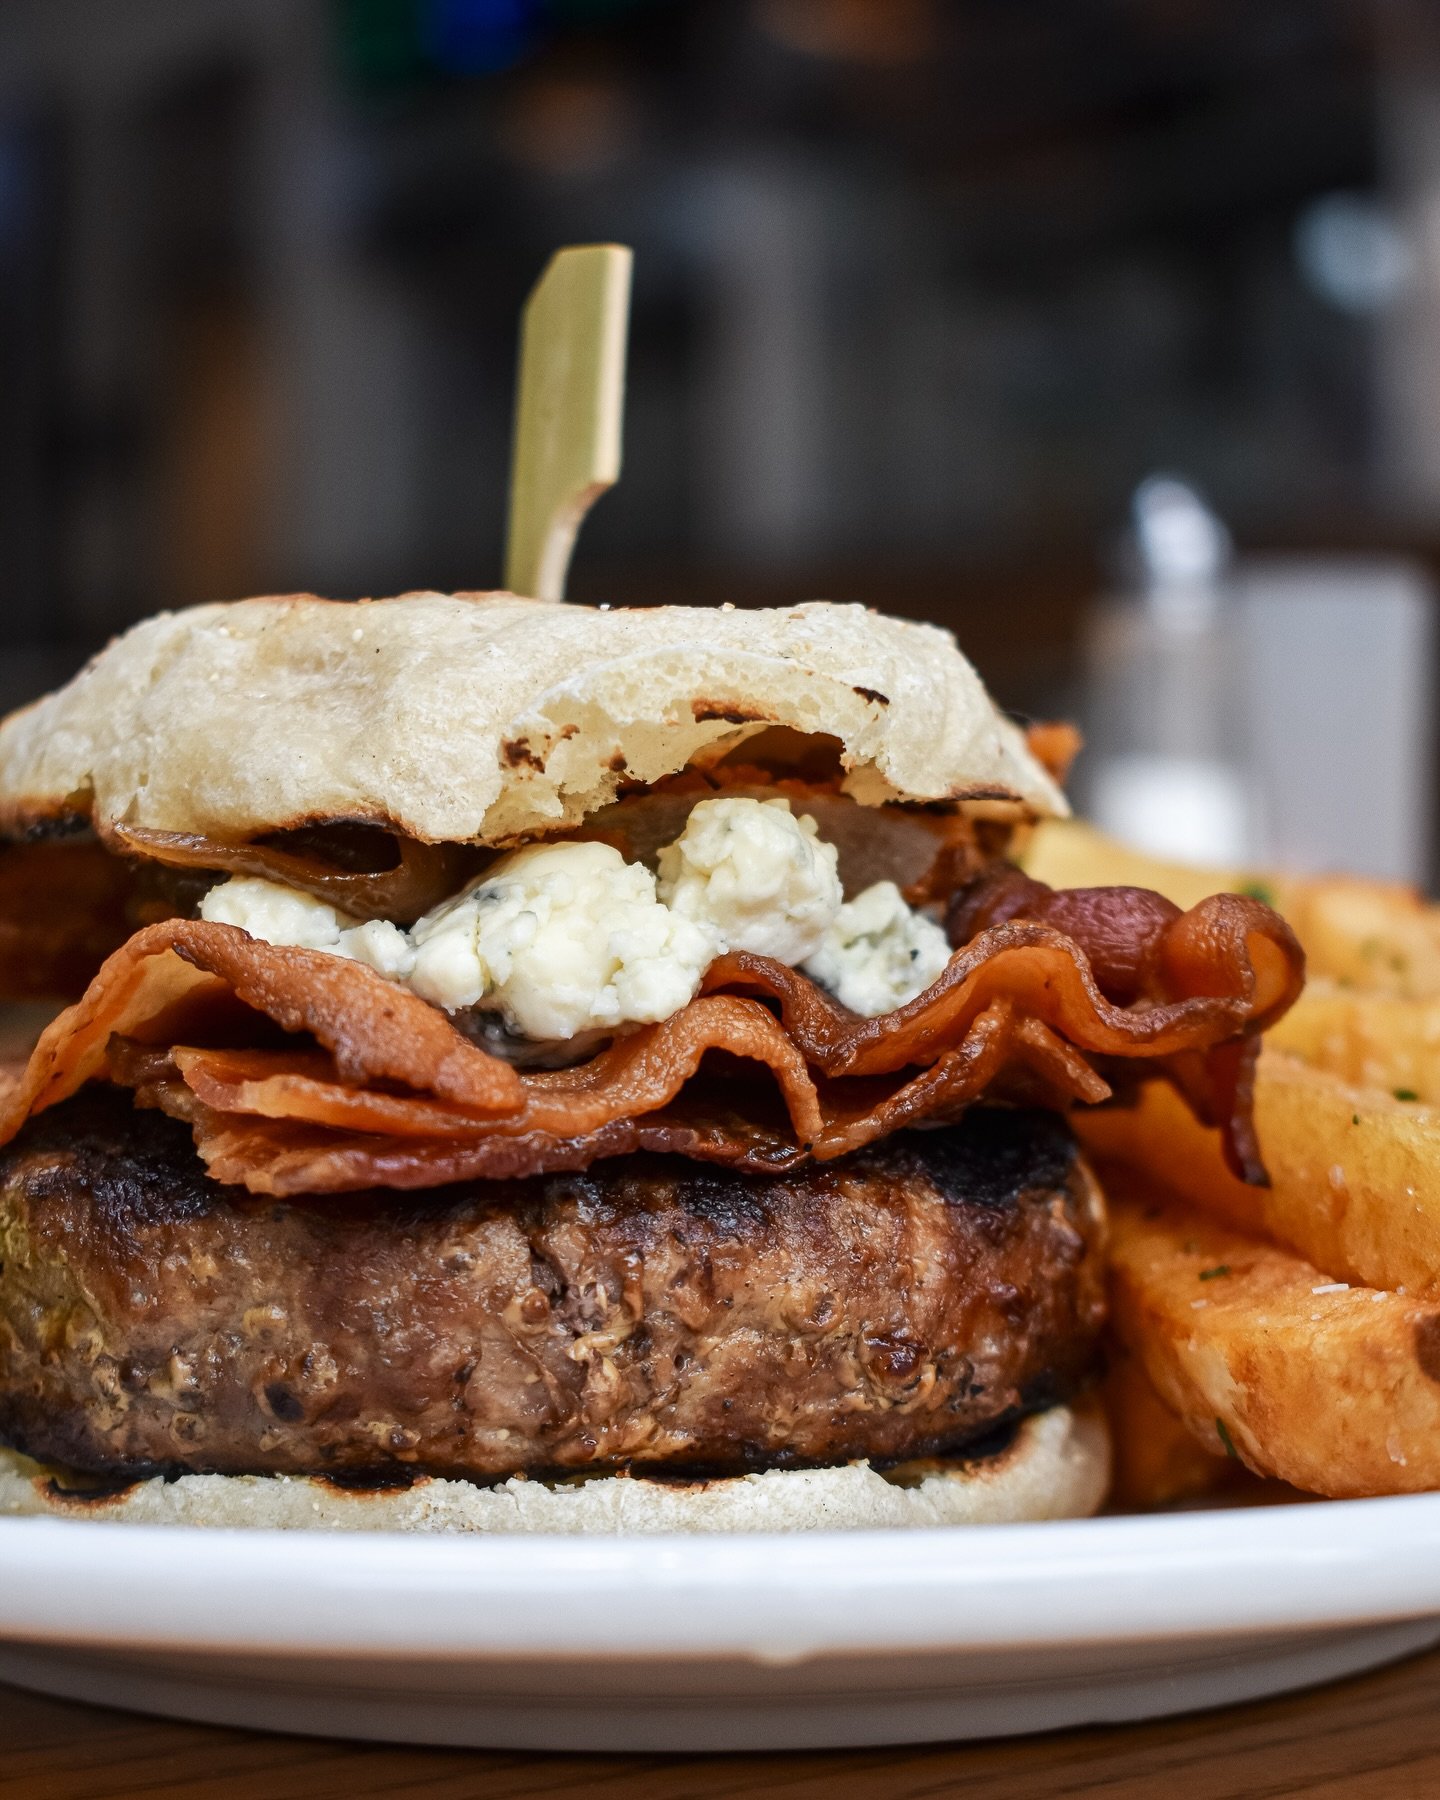 This bacon and blue cheese combo tastes even better than it looks 🤤

#burger #baconlover #instafood #tasty #bostonrestaurant